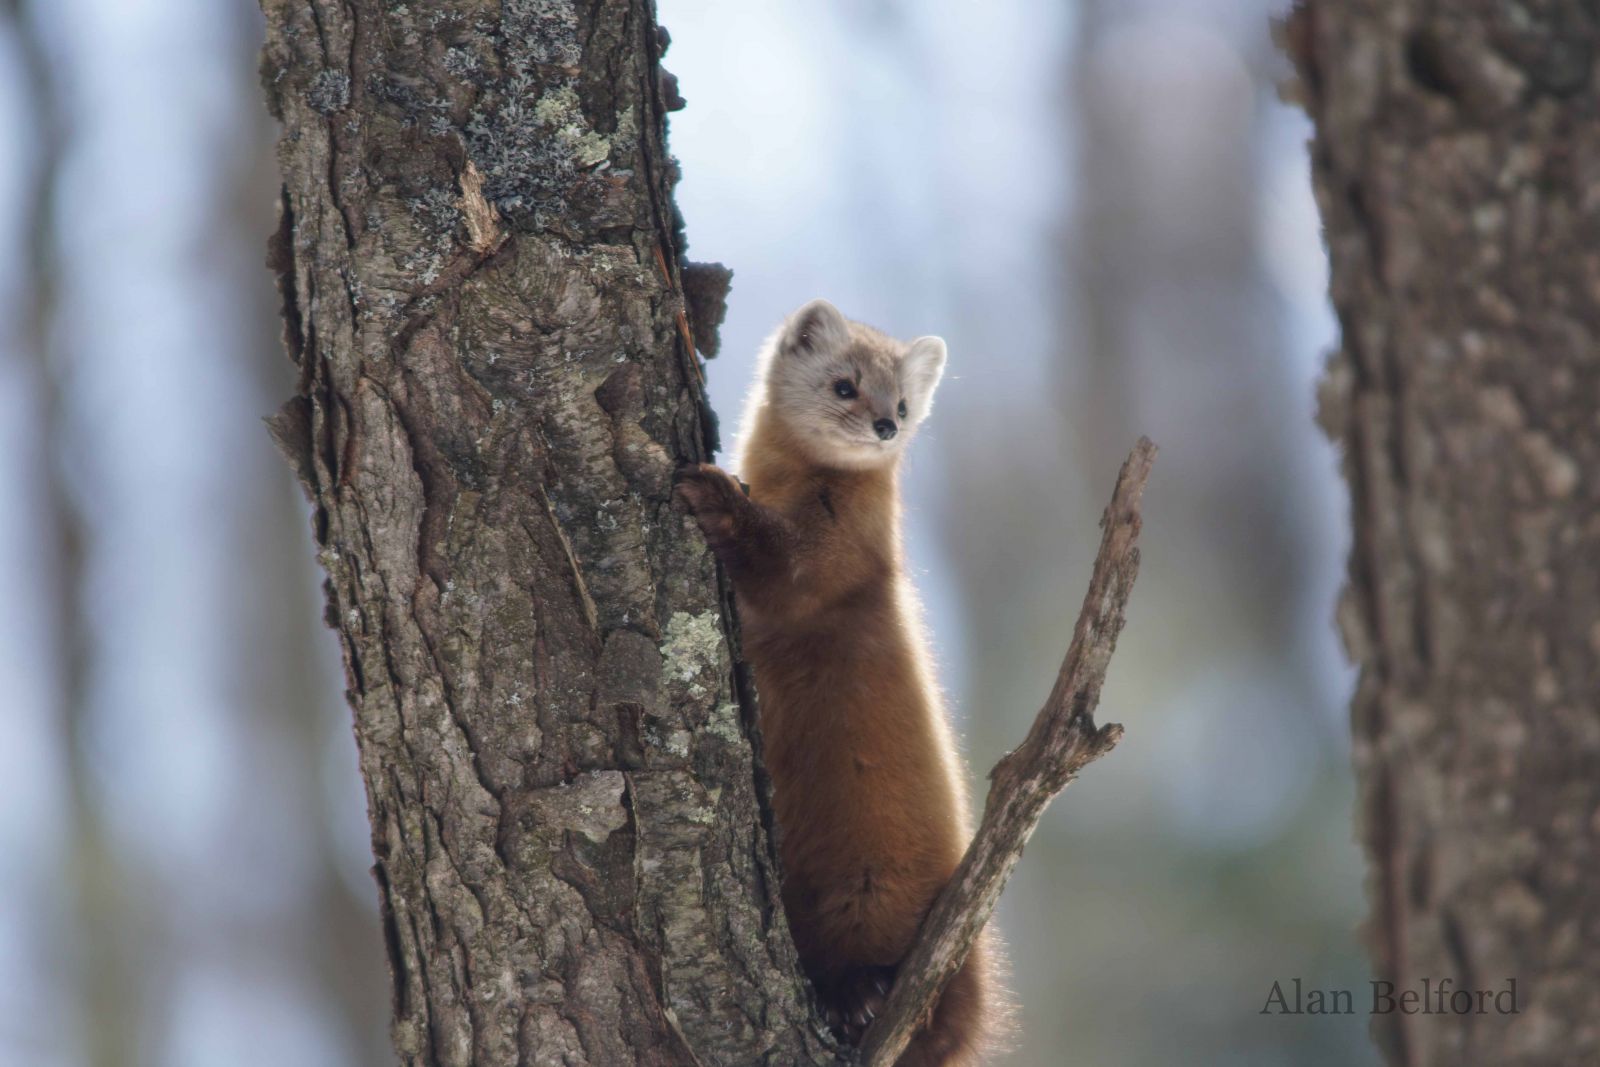 This marten eyed me curiously as I stood quietly waiting.